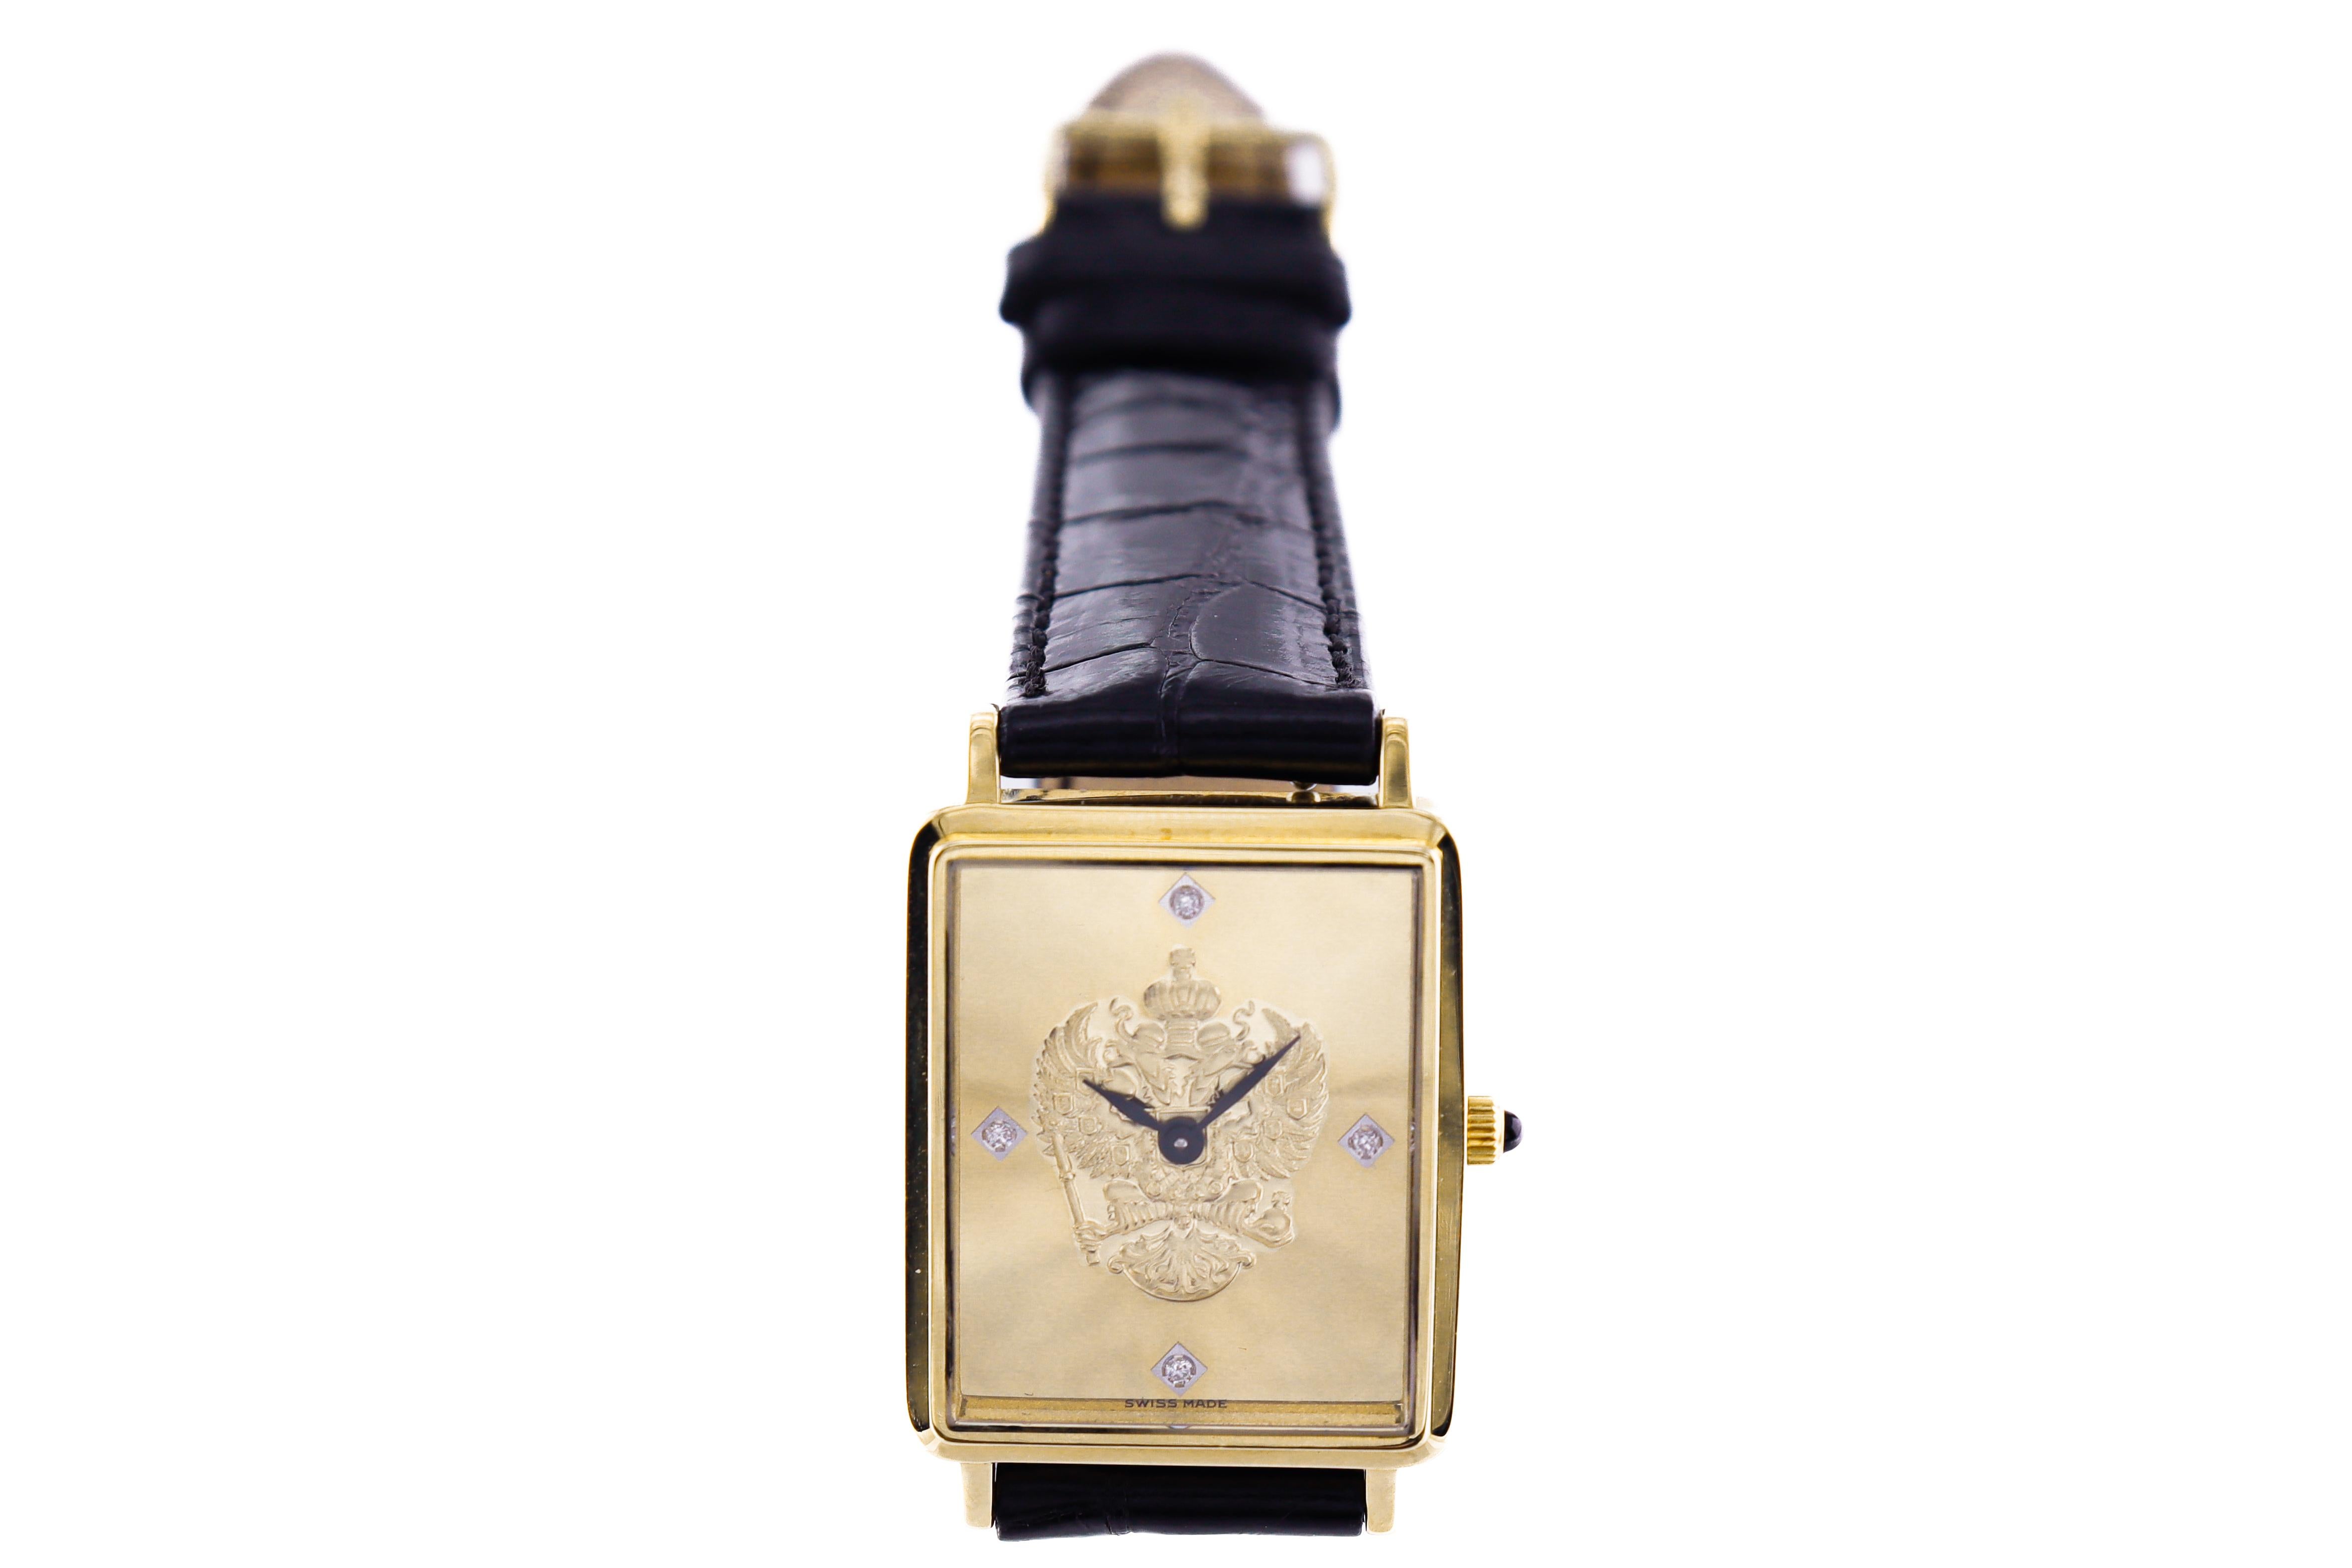 Franklin MInt Commemorative or 18 Karat Yellow Gold Men's Wrist Watch In Excellent Condition For Sale In Long Beach, CA